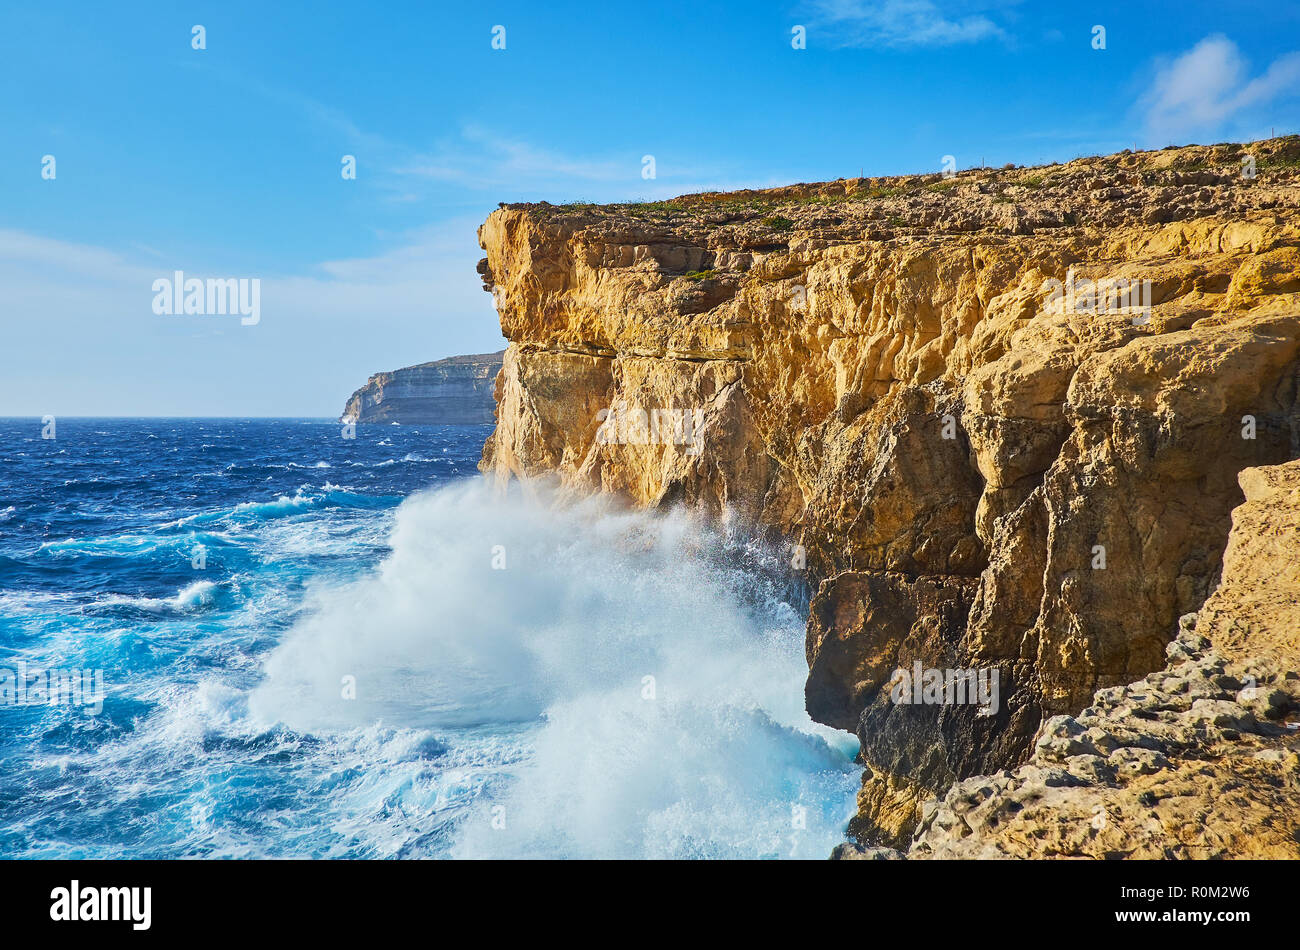 Watch the foaming waves of the storm from the rocky cliff of San Lawrenz coast at former Azure Window site, Gozo Island, Malta. Stock Photo